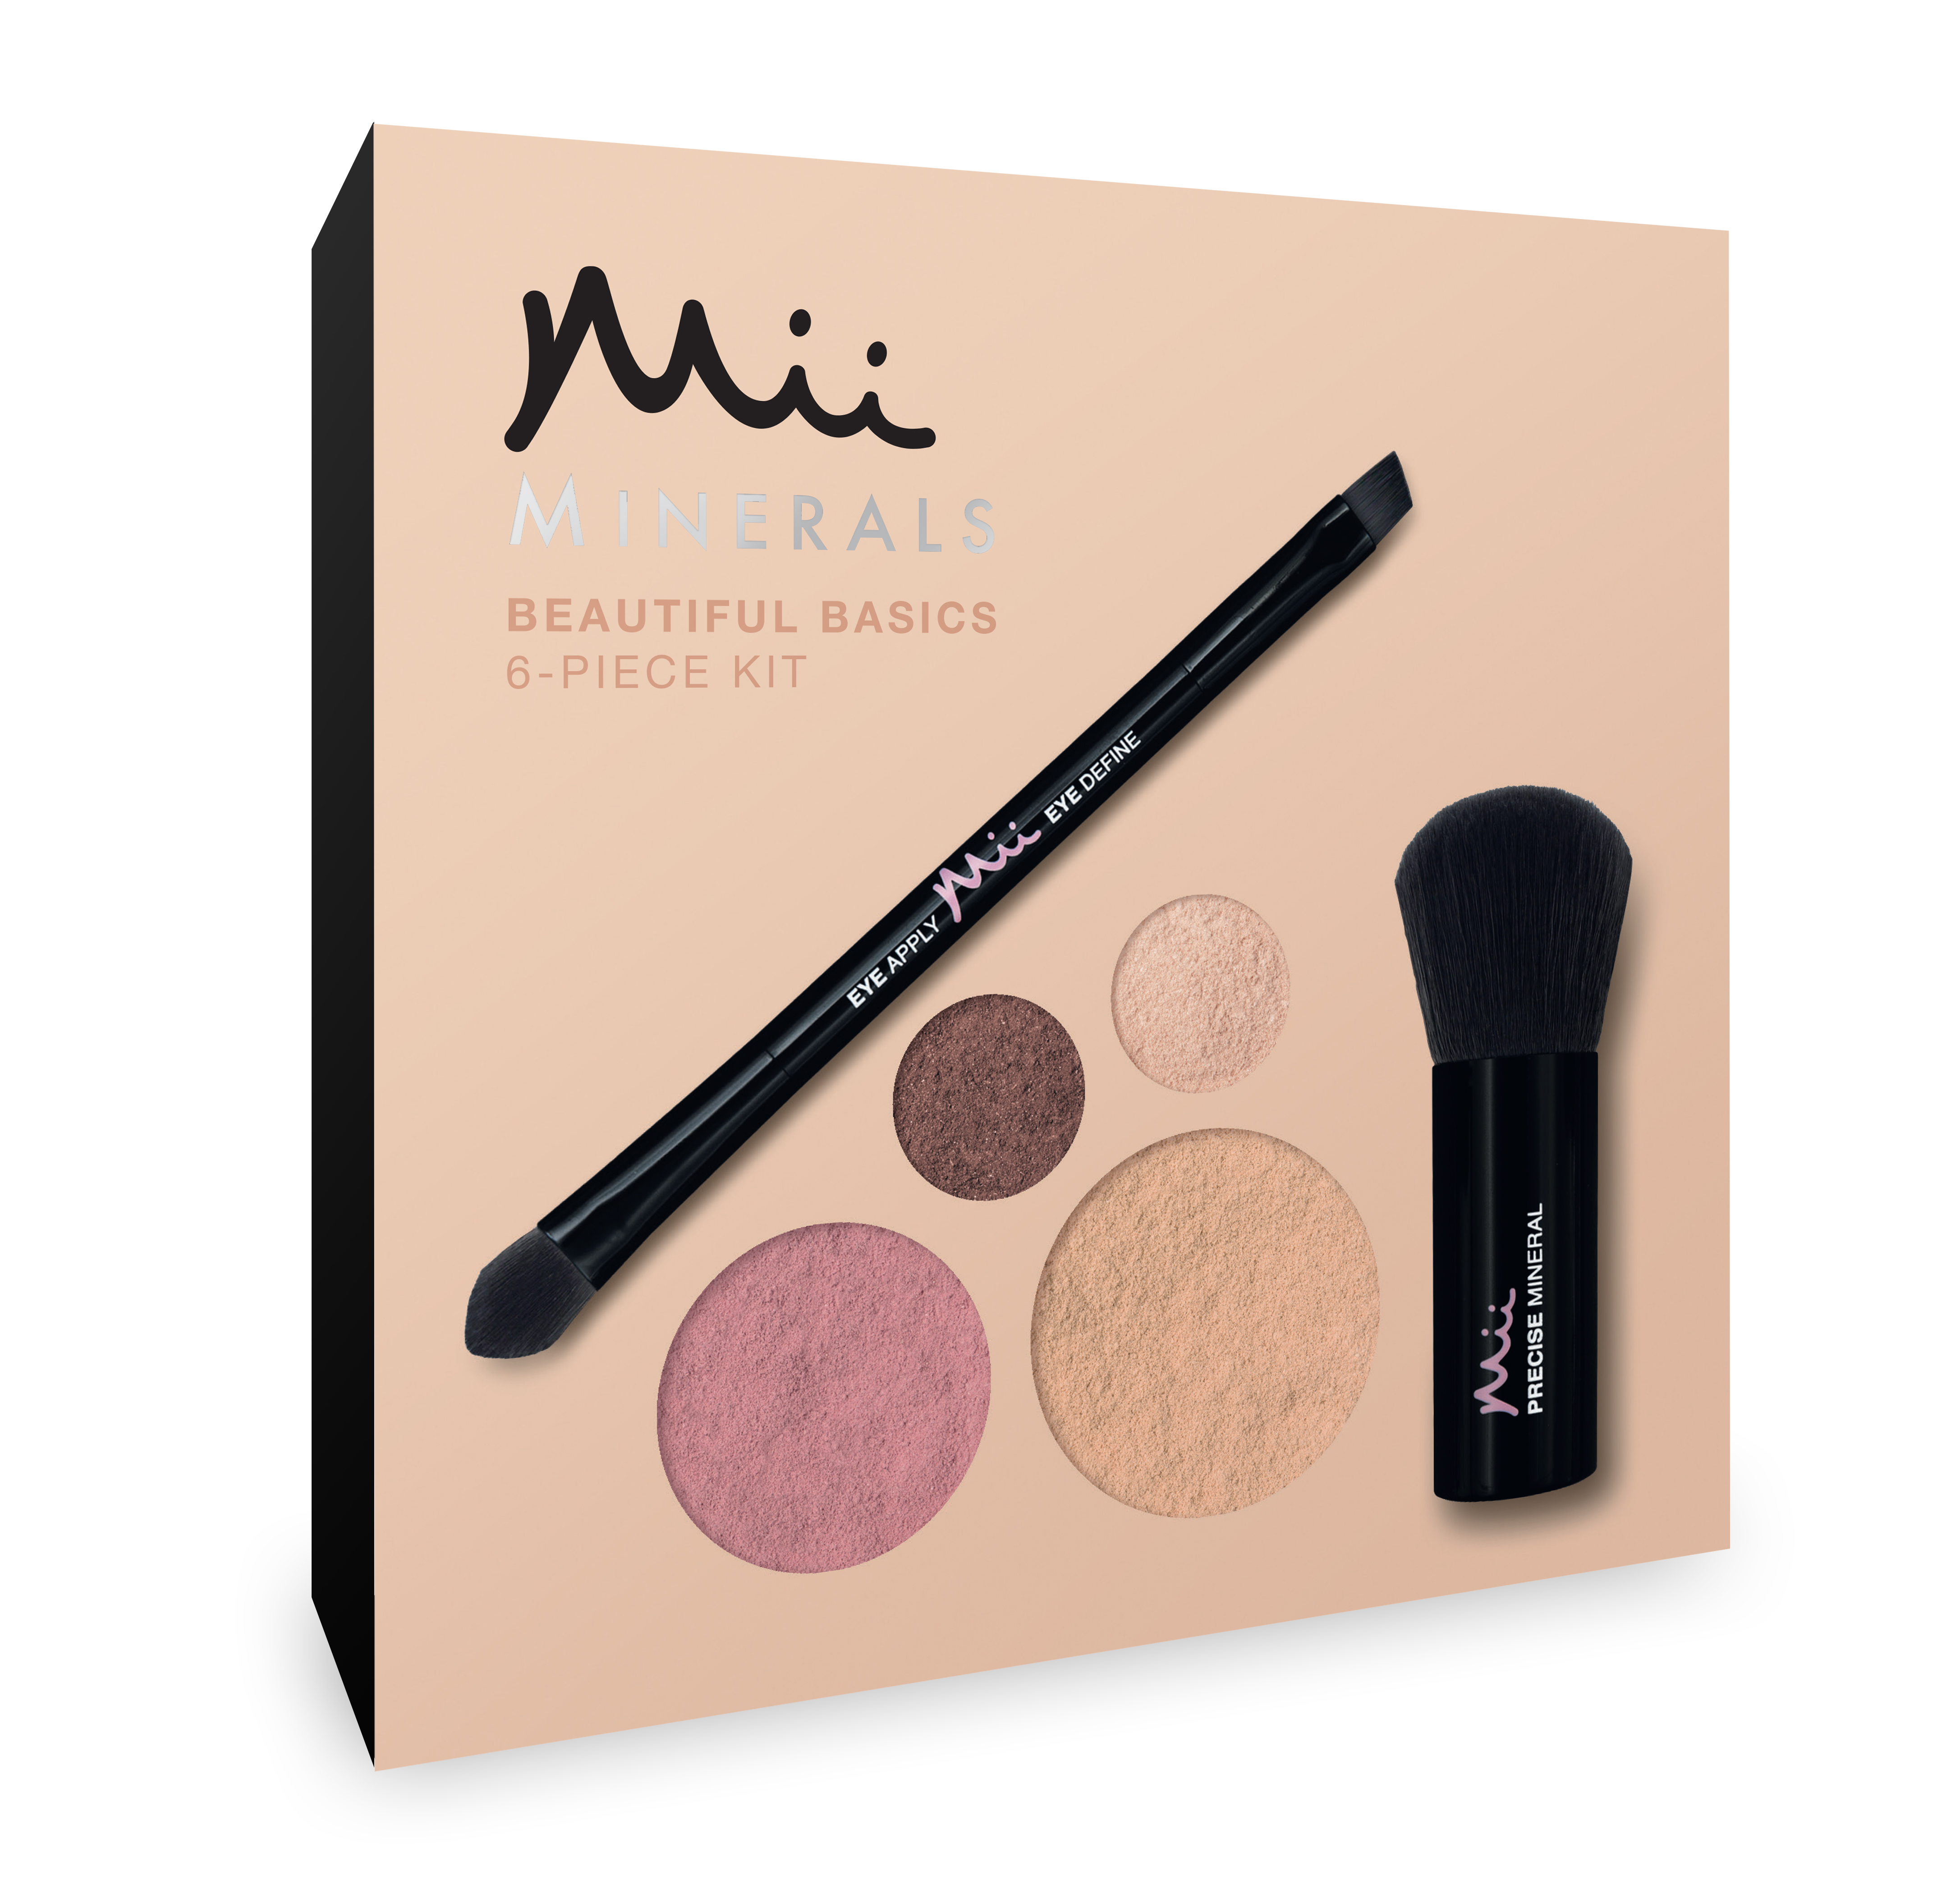 Mii Minerals go back to basics with new kit